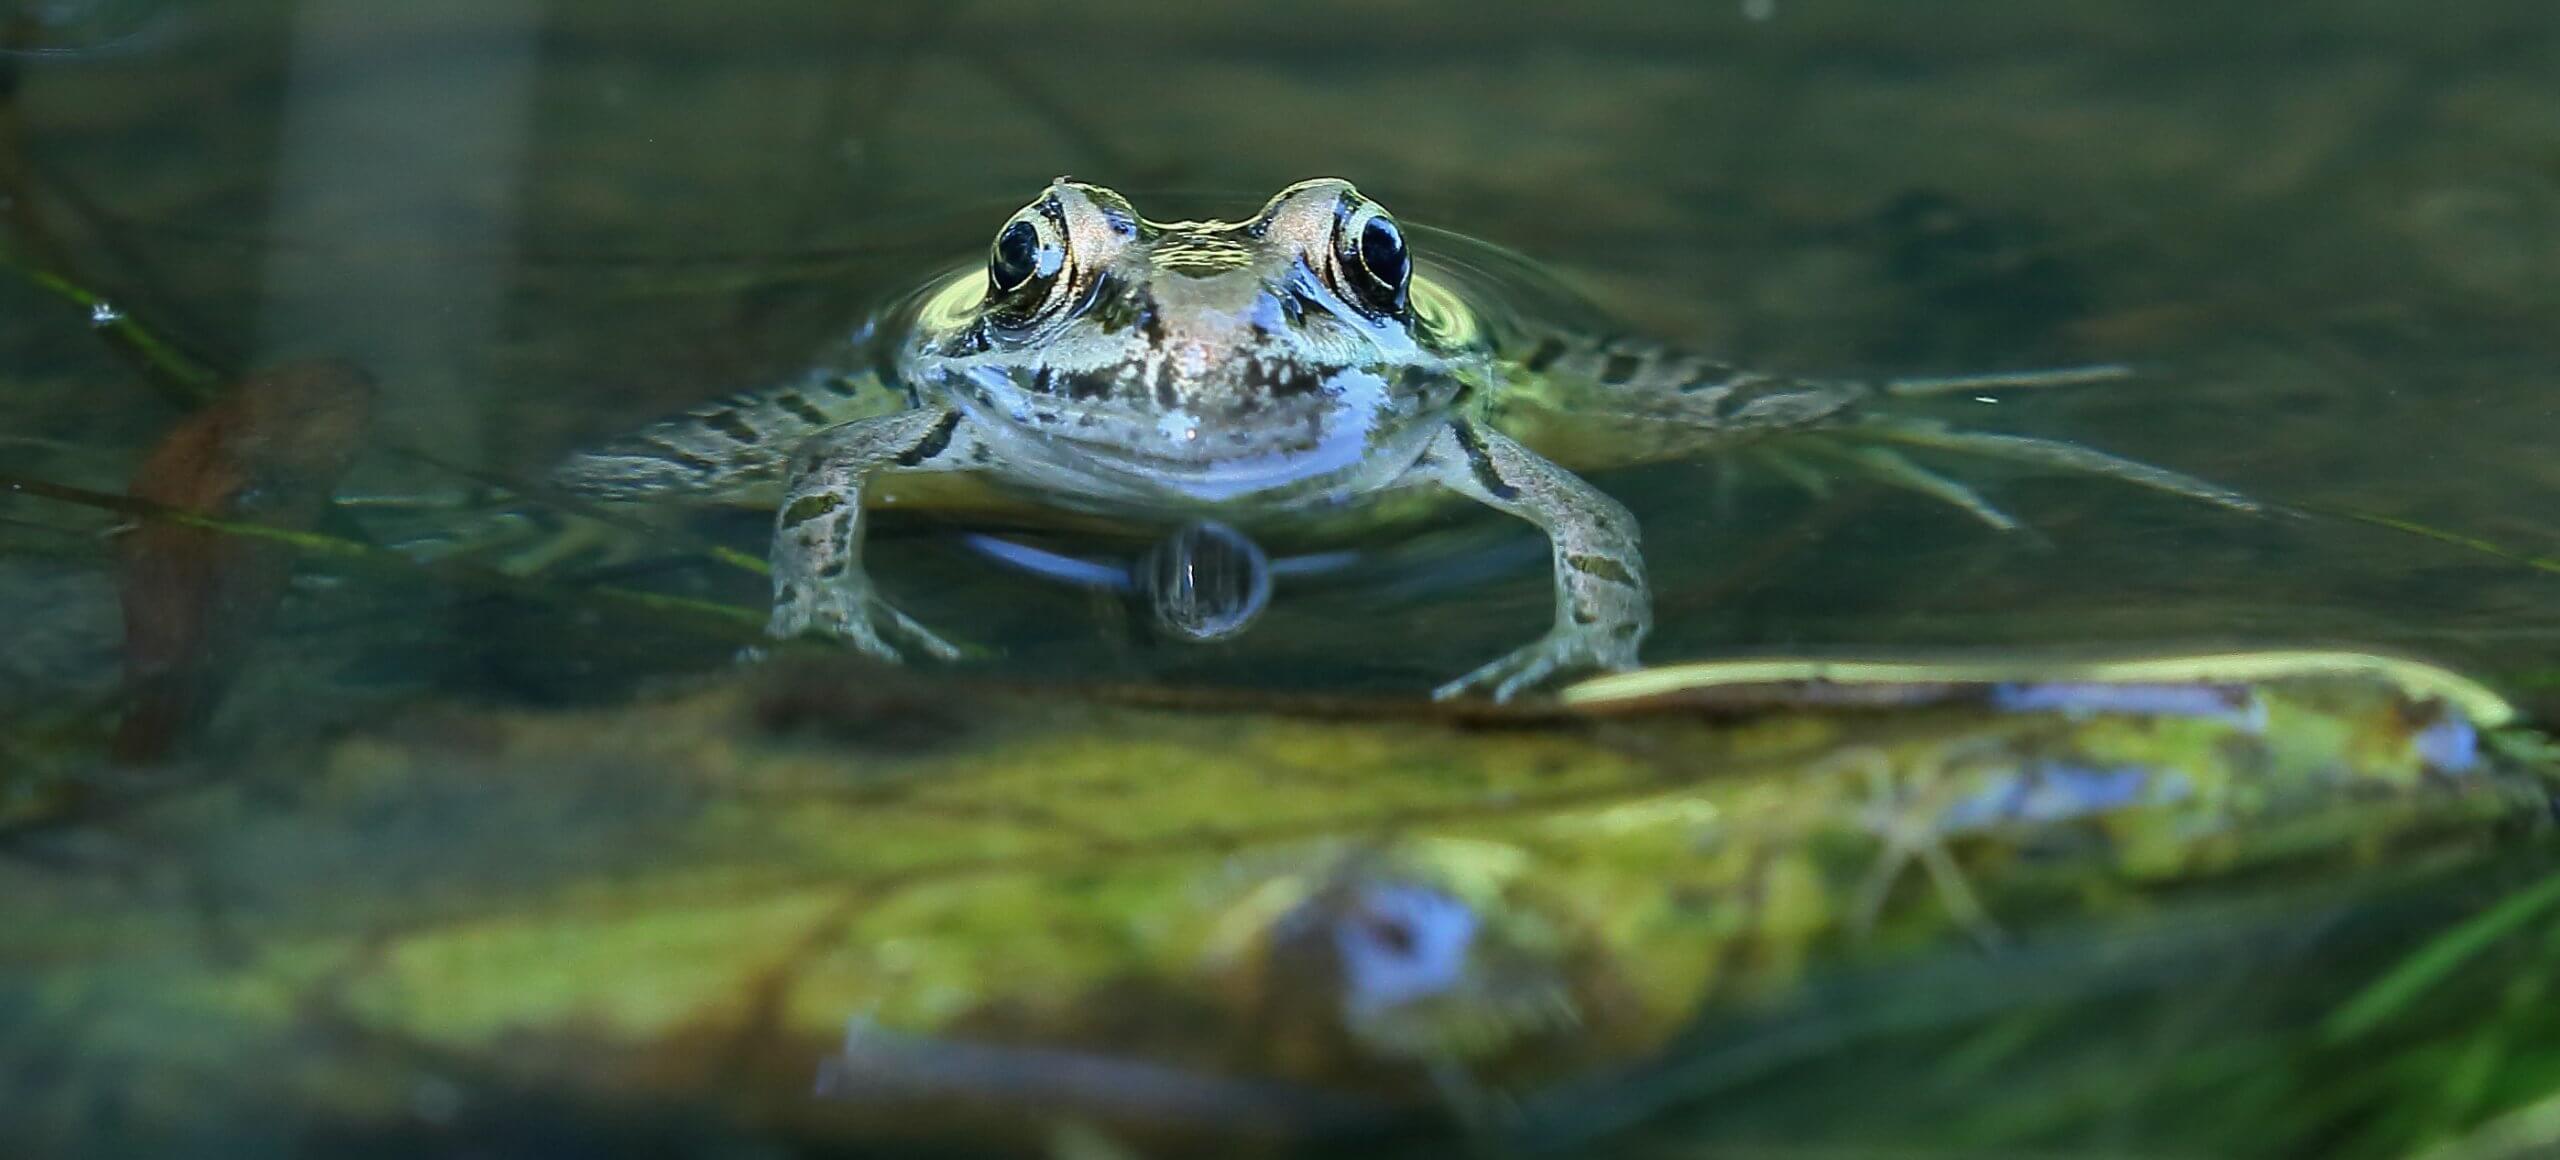 A green pickerel frog pokes its head out of the water while holding itself up on a floating green leaf.